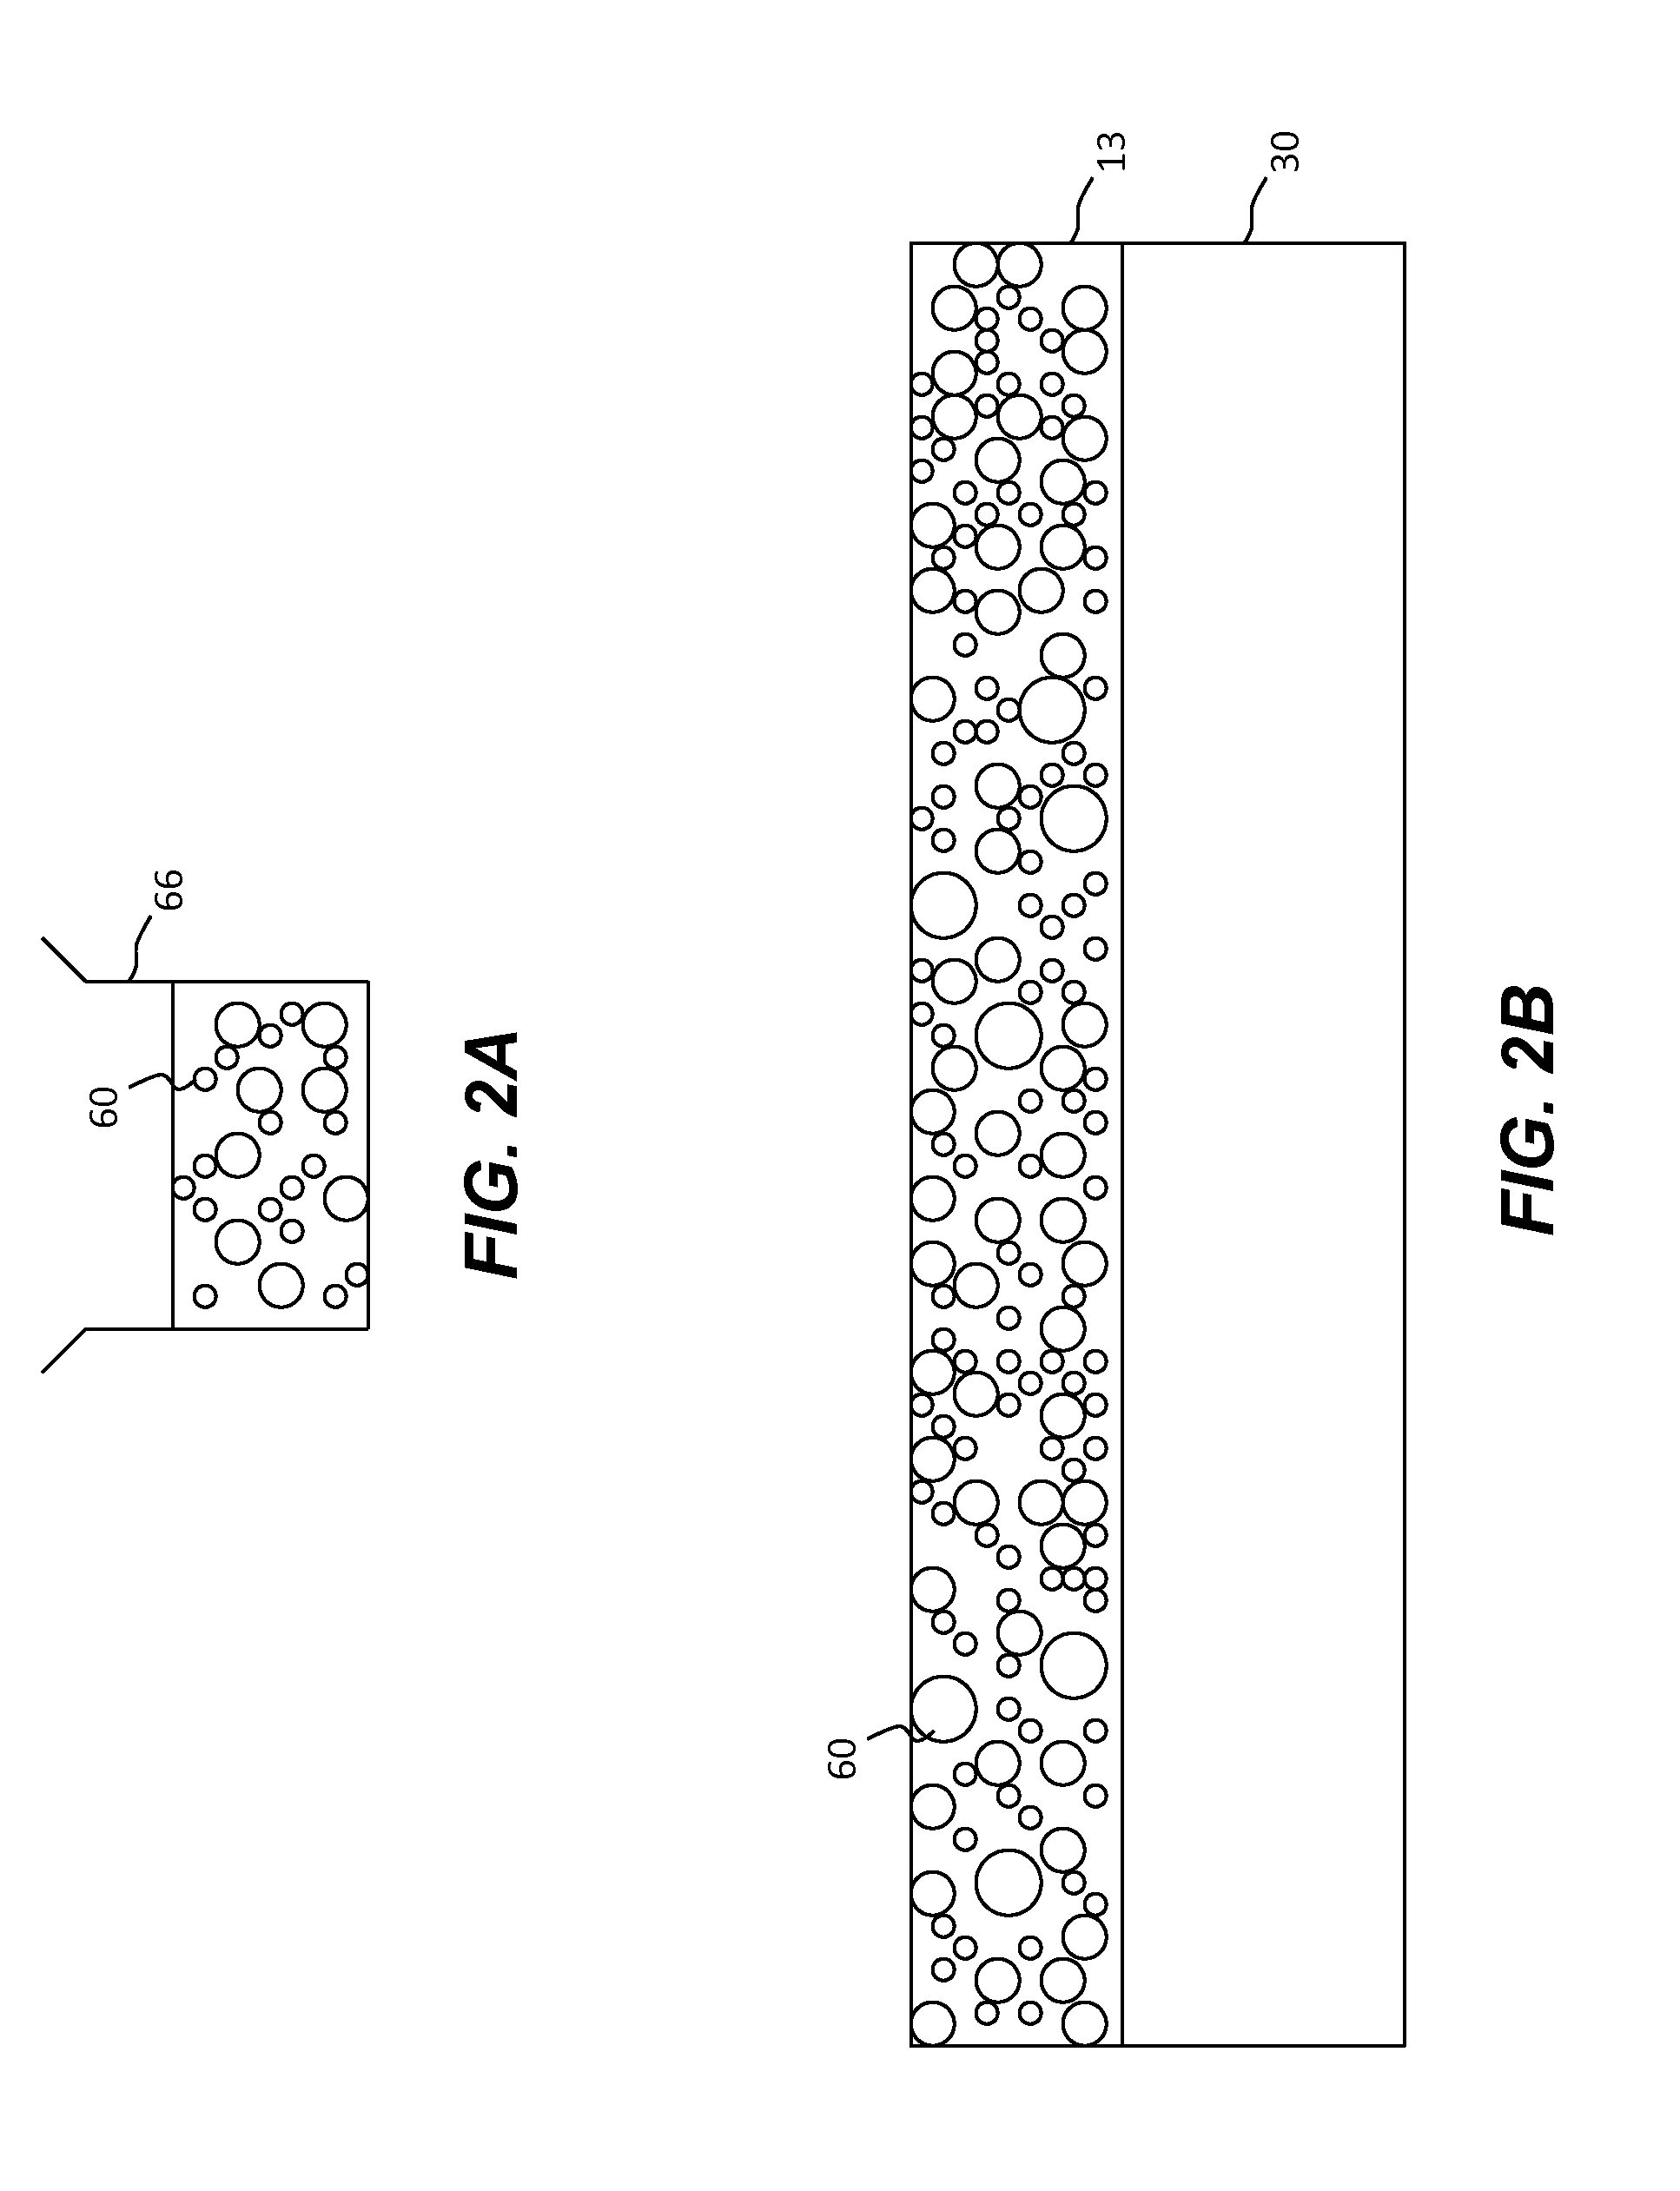 Using imprinted multi-layer biocidal particle structure